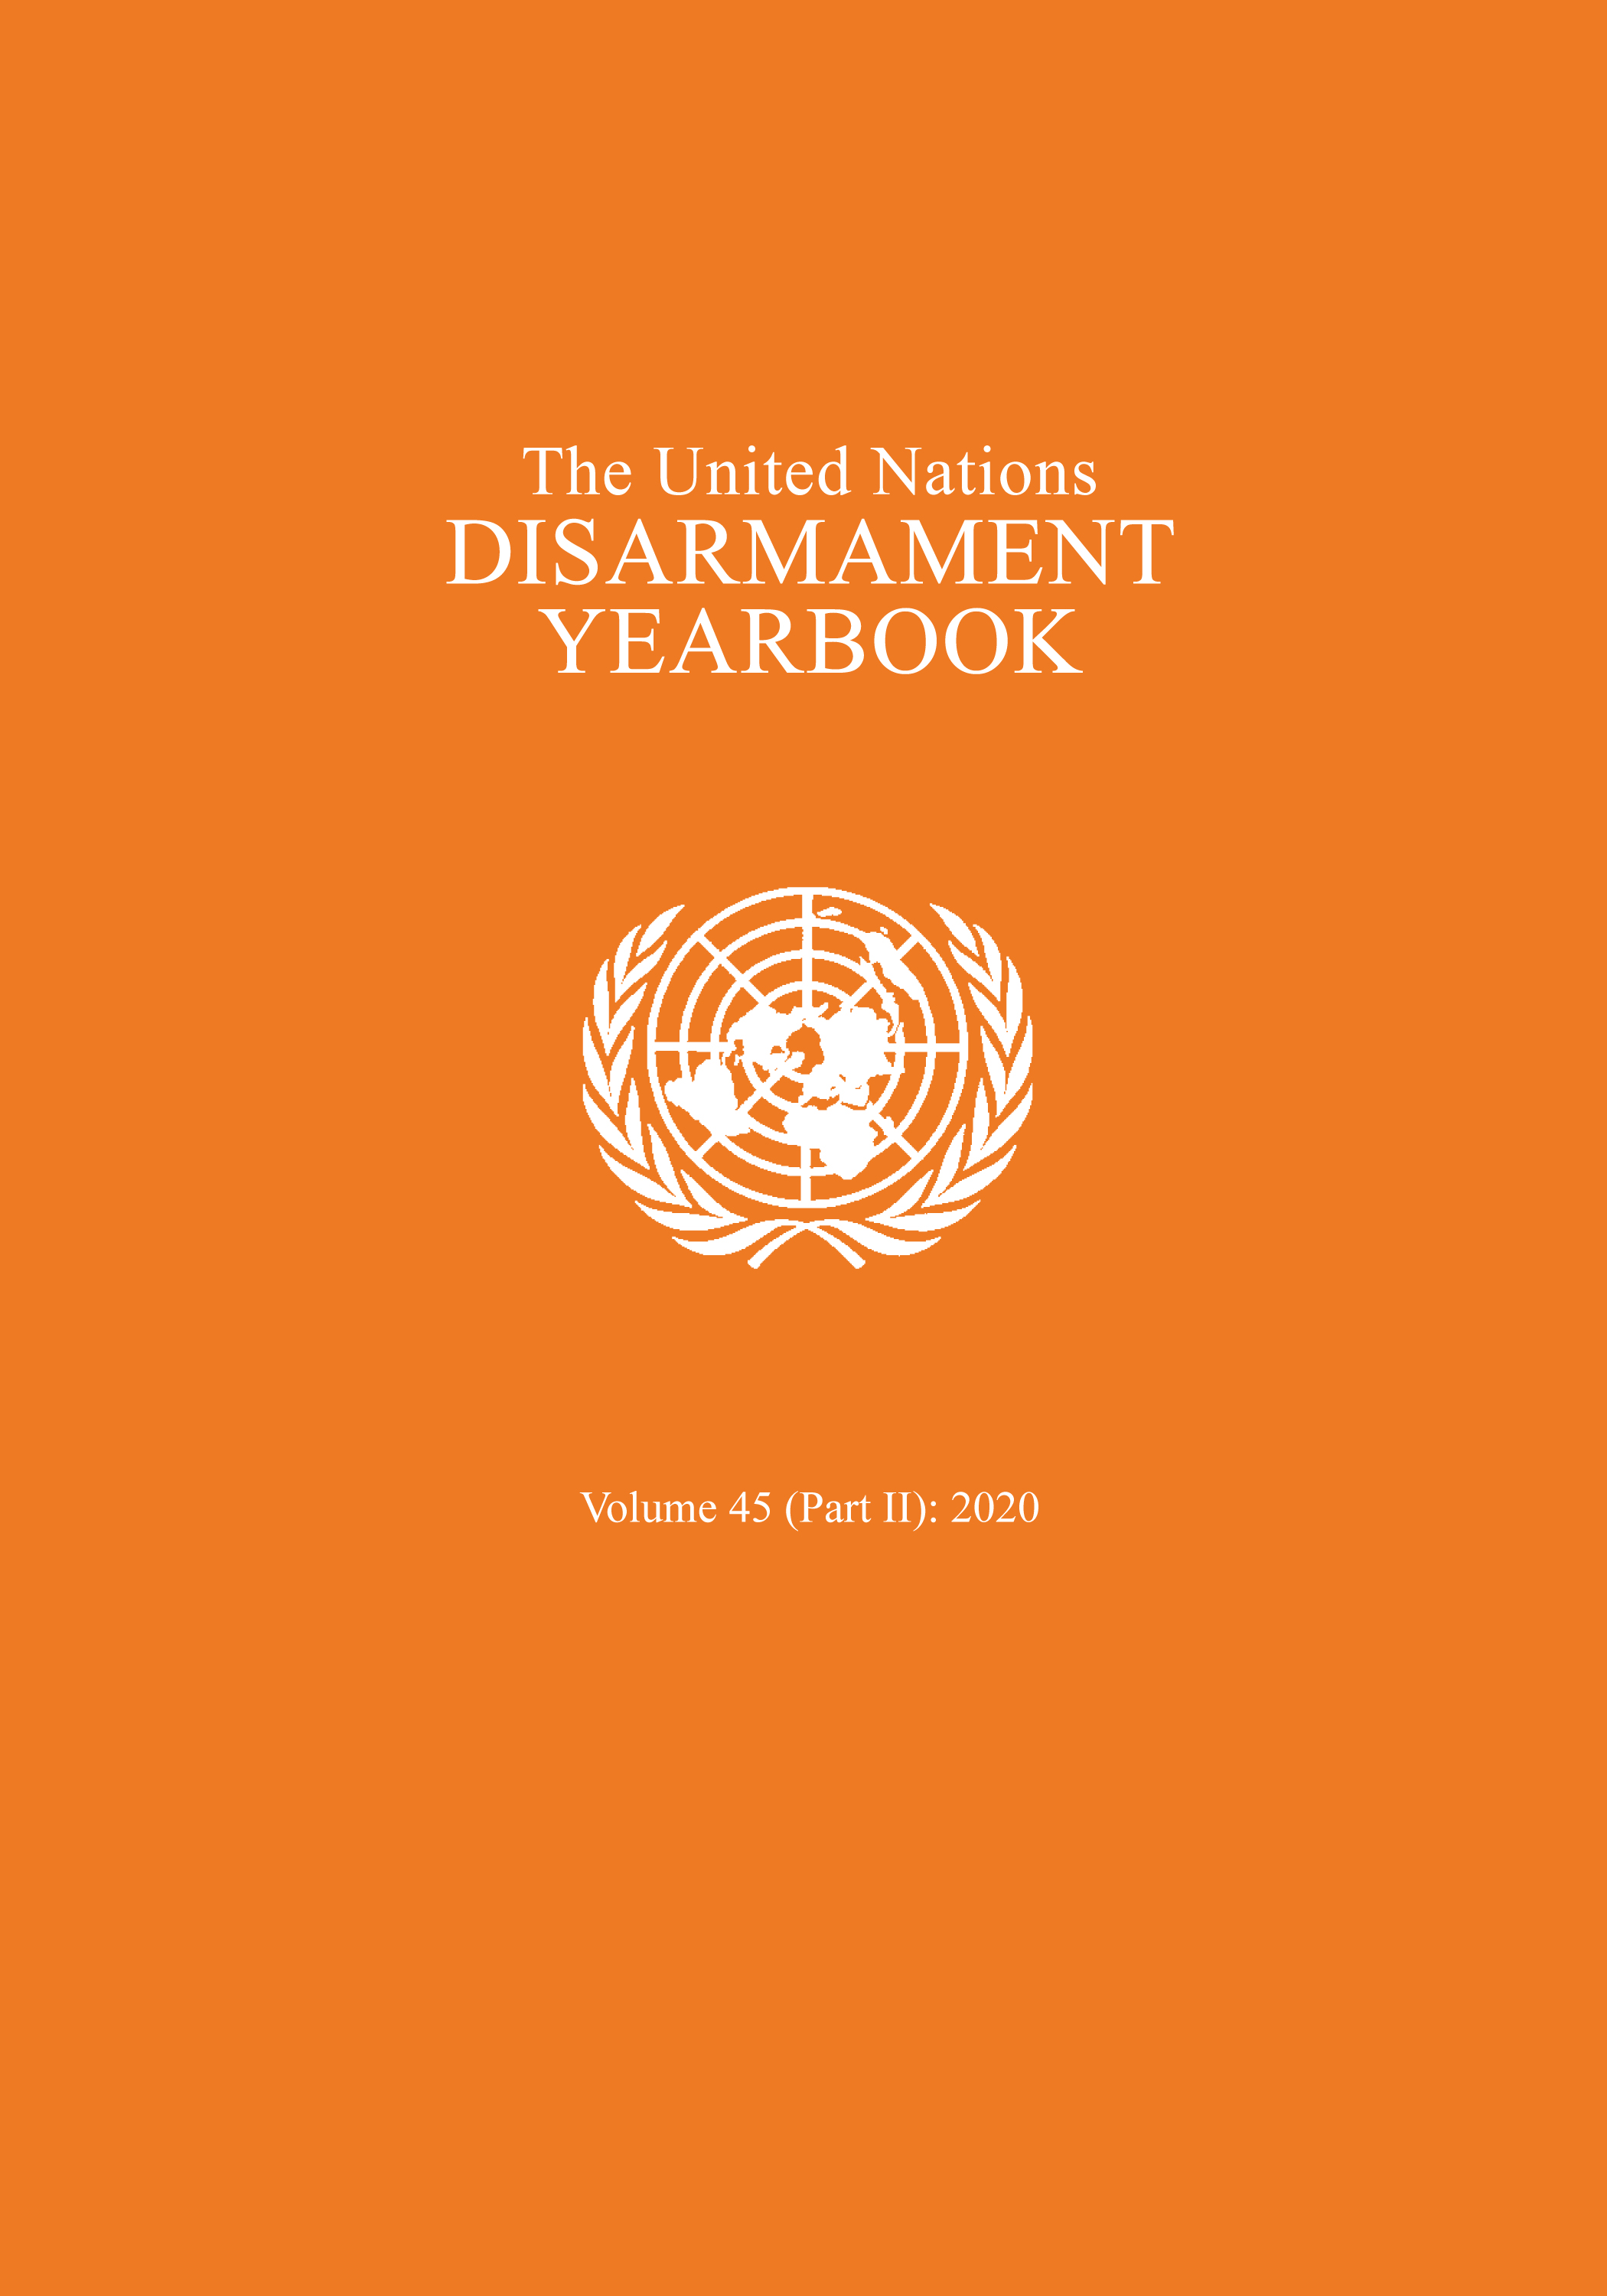 image of United Nations Disarmament Yearbook 2020: Part II